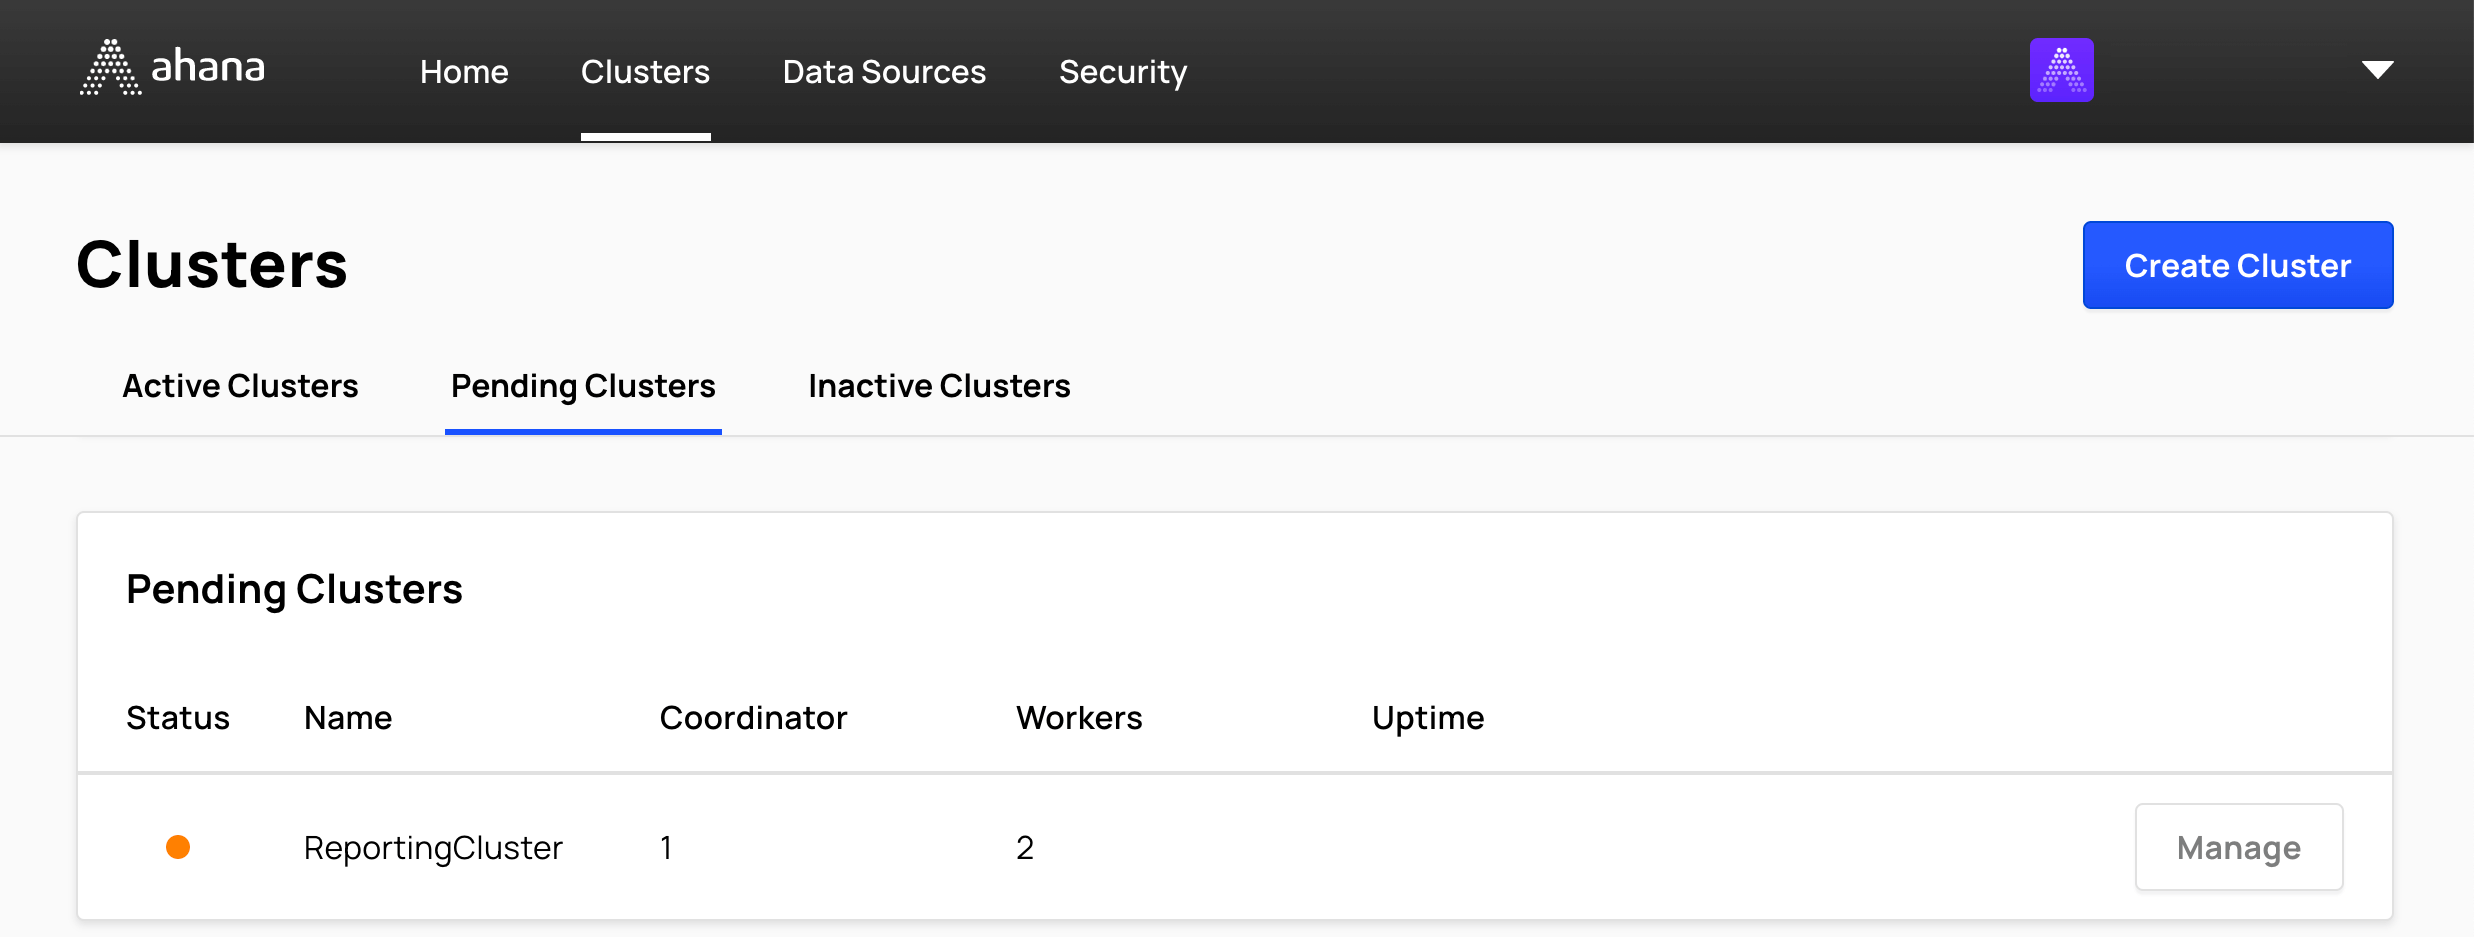 Cluster in Pending state